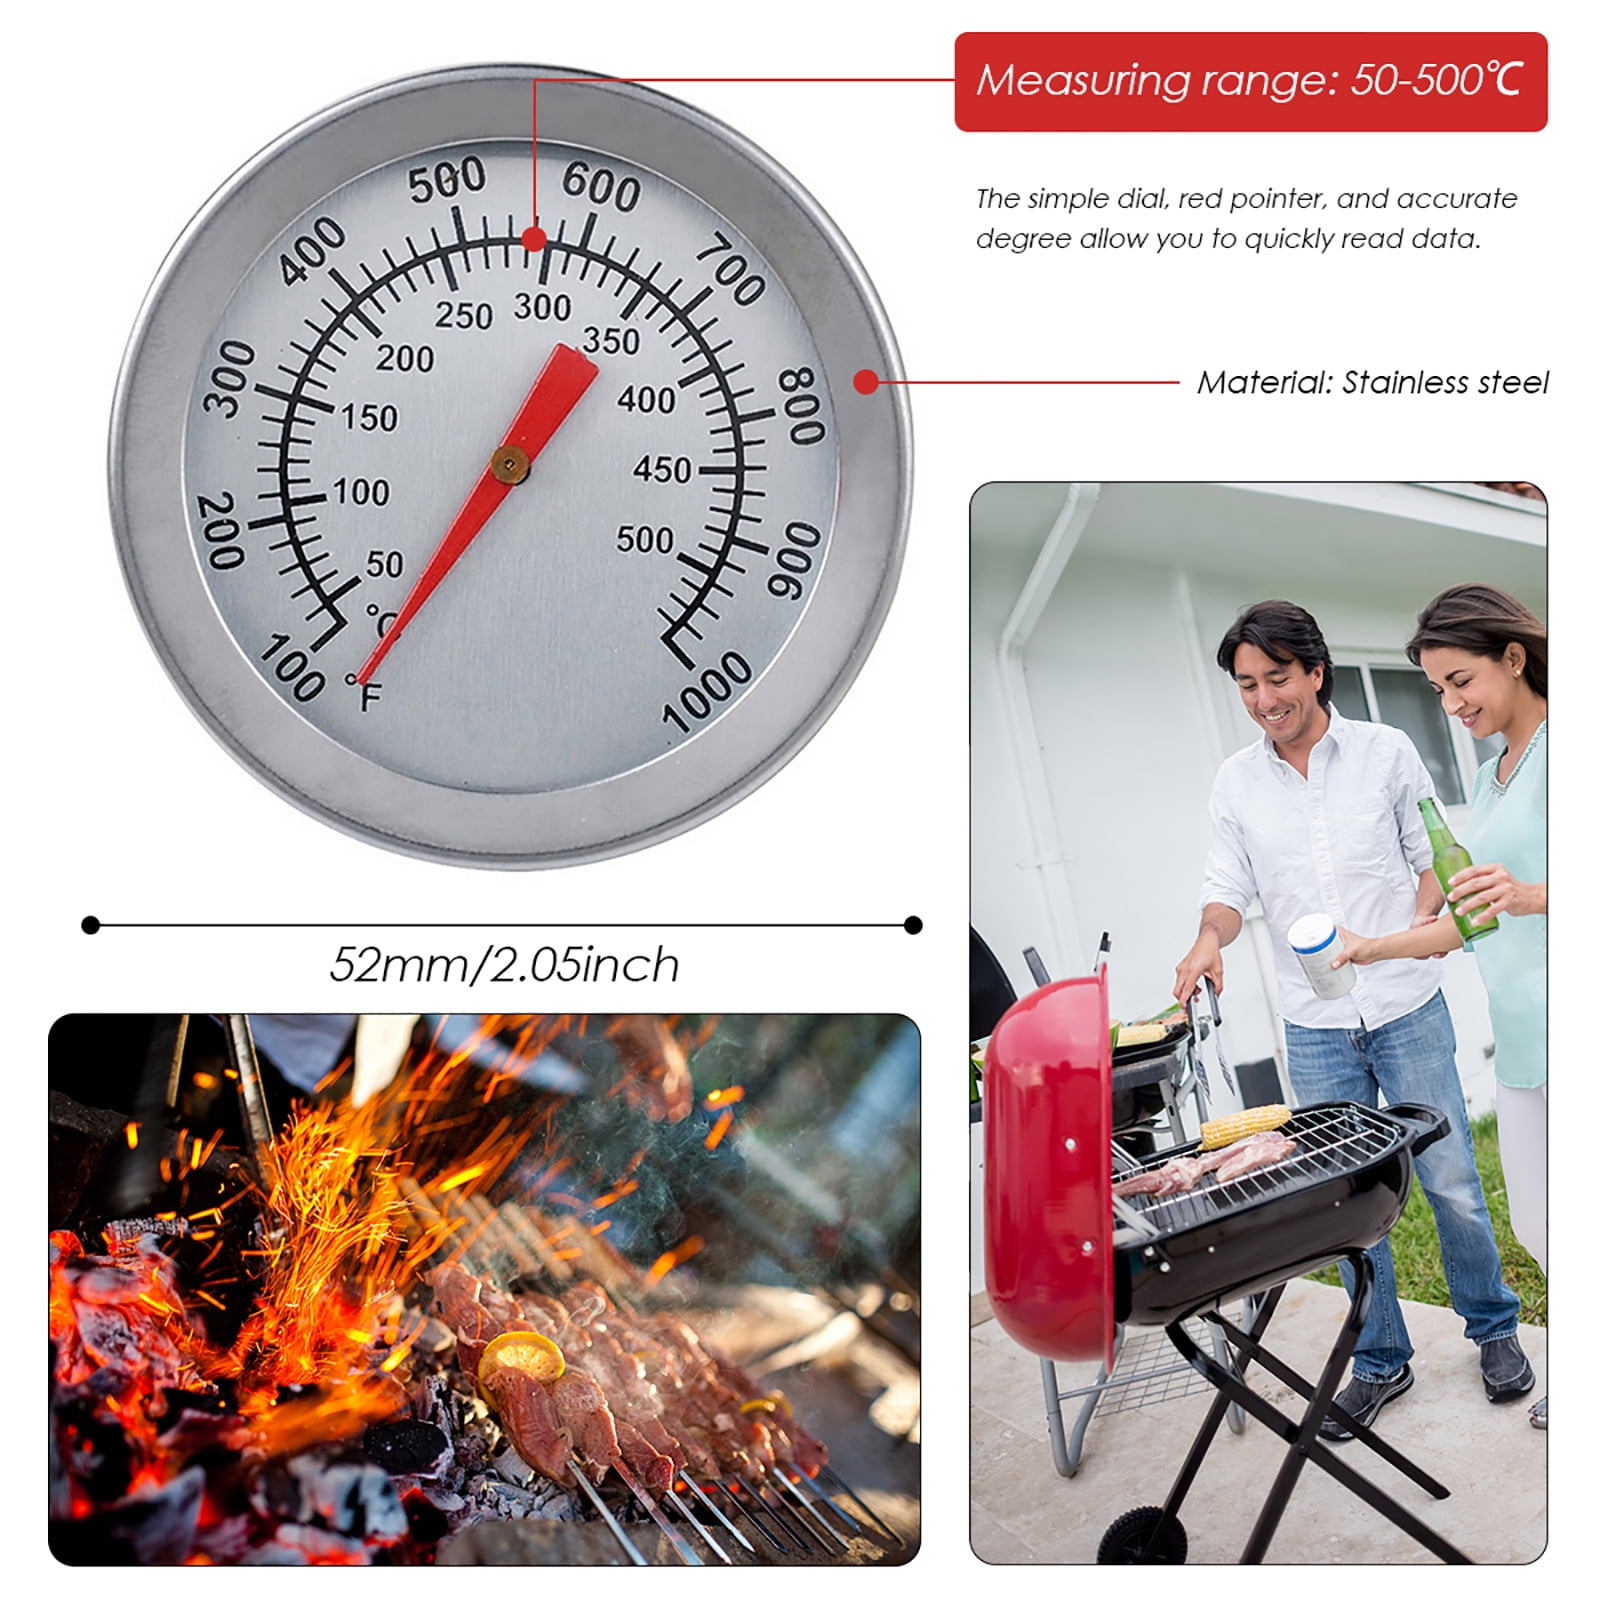 Actual temp is way off vs probe/lid thermometer : r/PitBossGrills